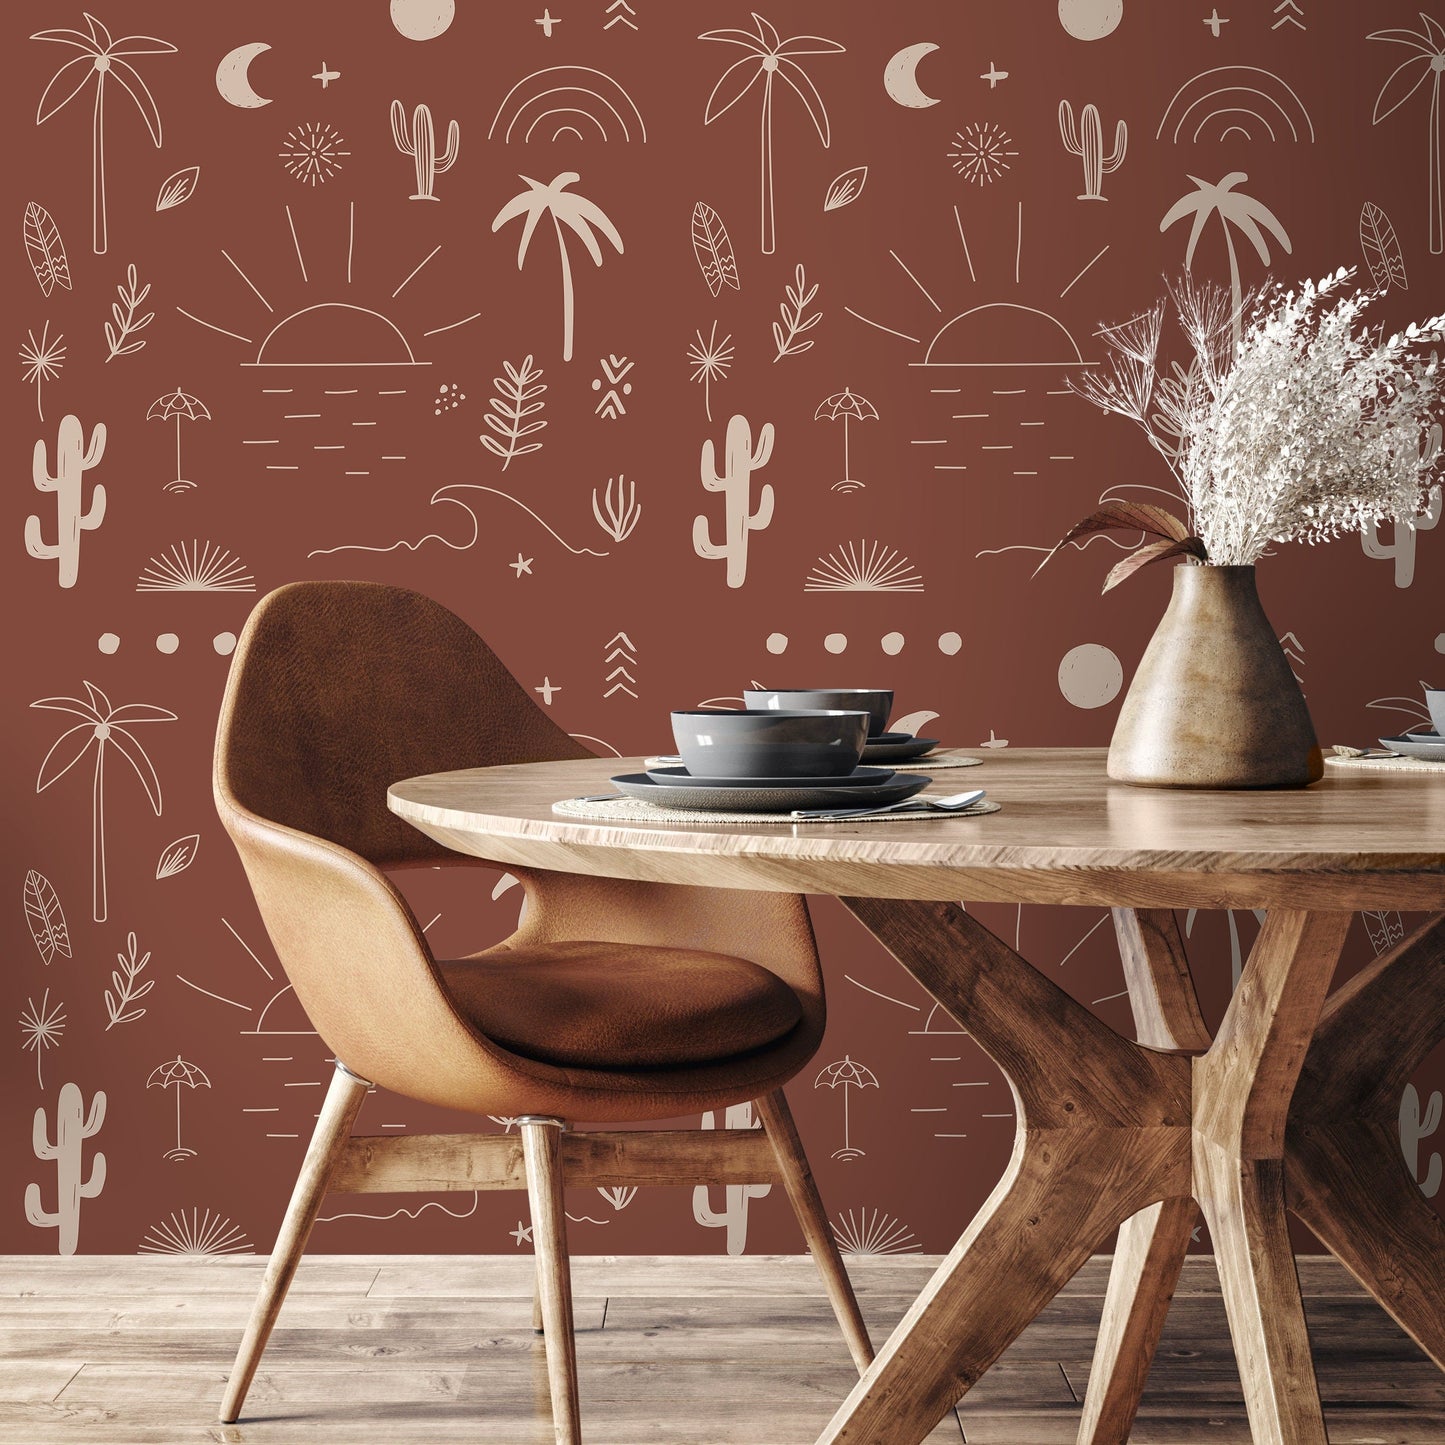 California in Terracota Wallpaper Minimalist Beach Peel and Stick Removable and Repositionable or Traditional Pre-pasted Wallpaper - ZACN